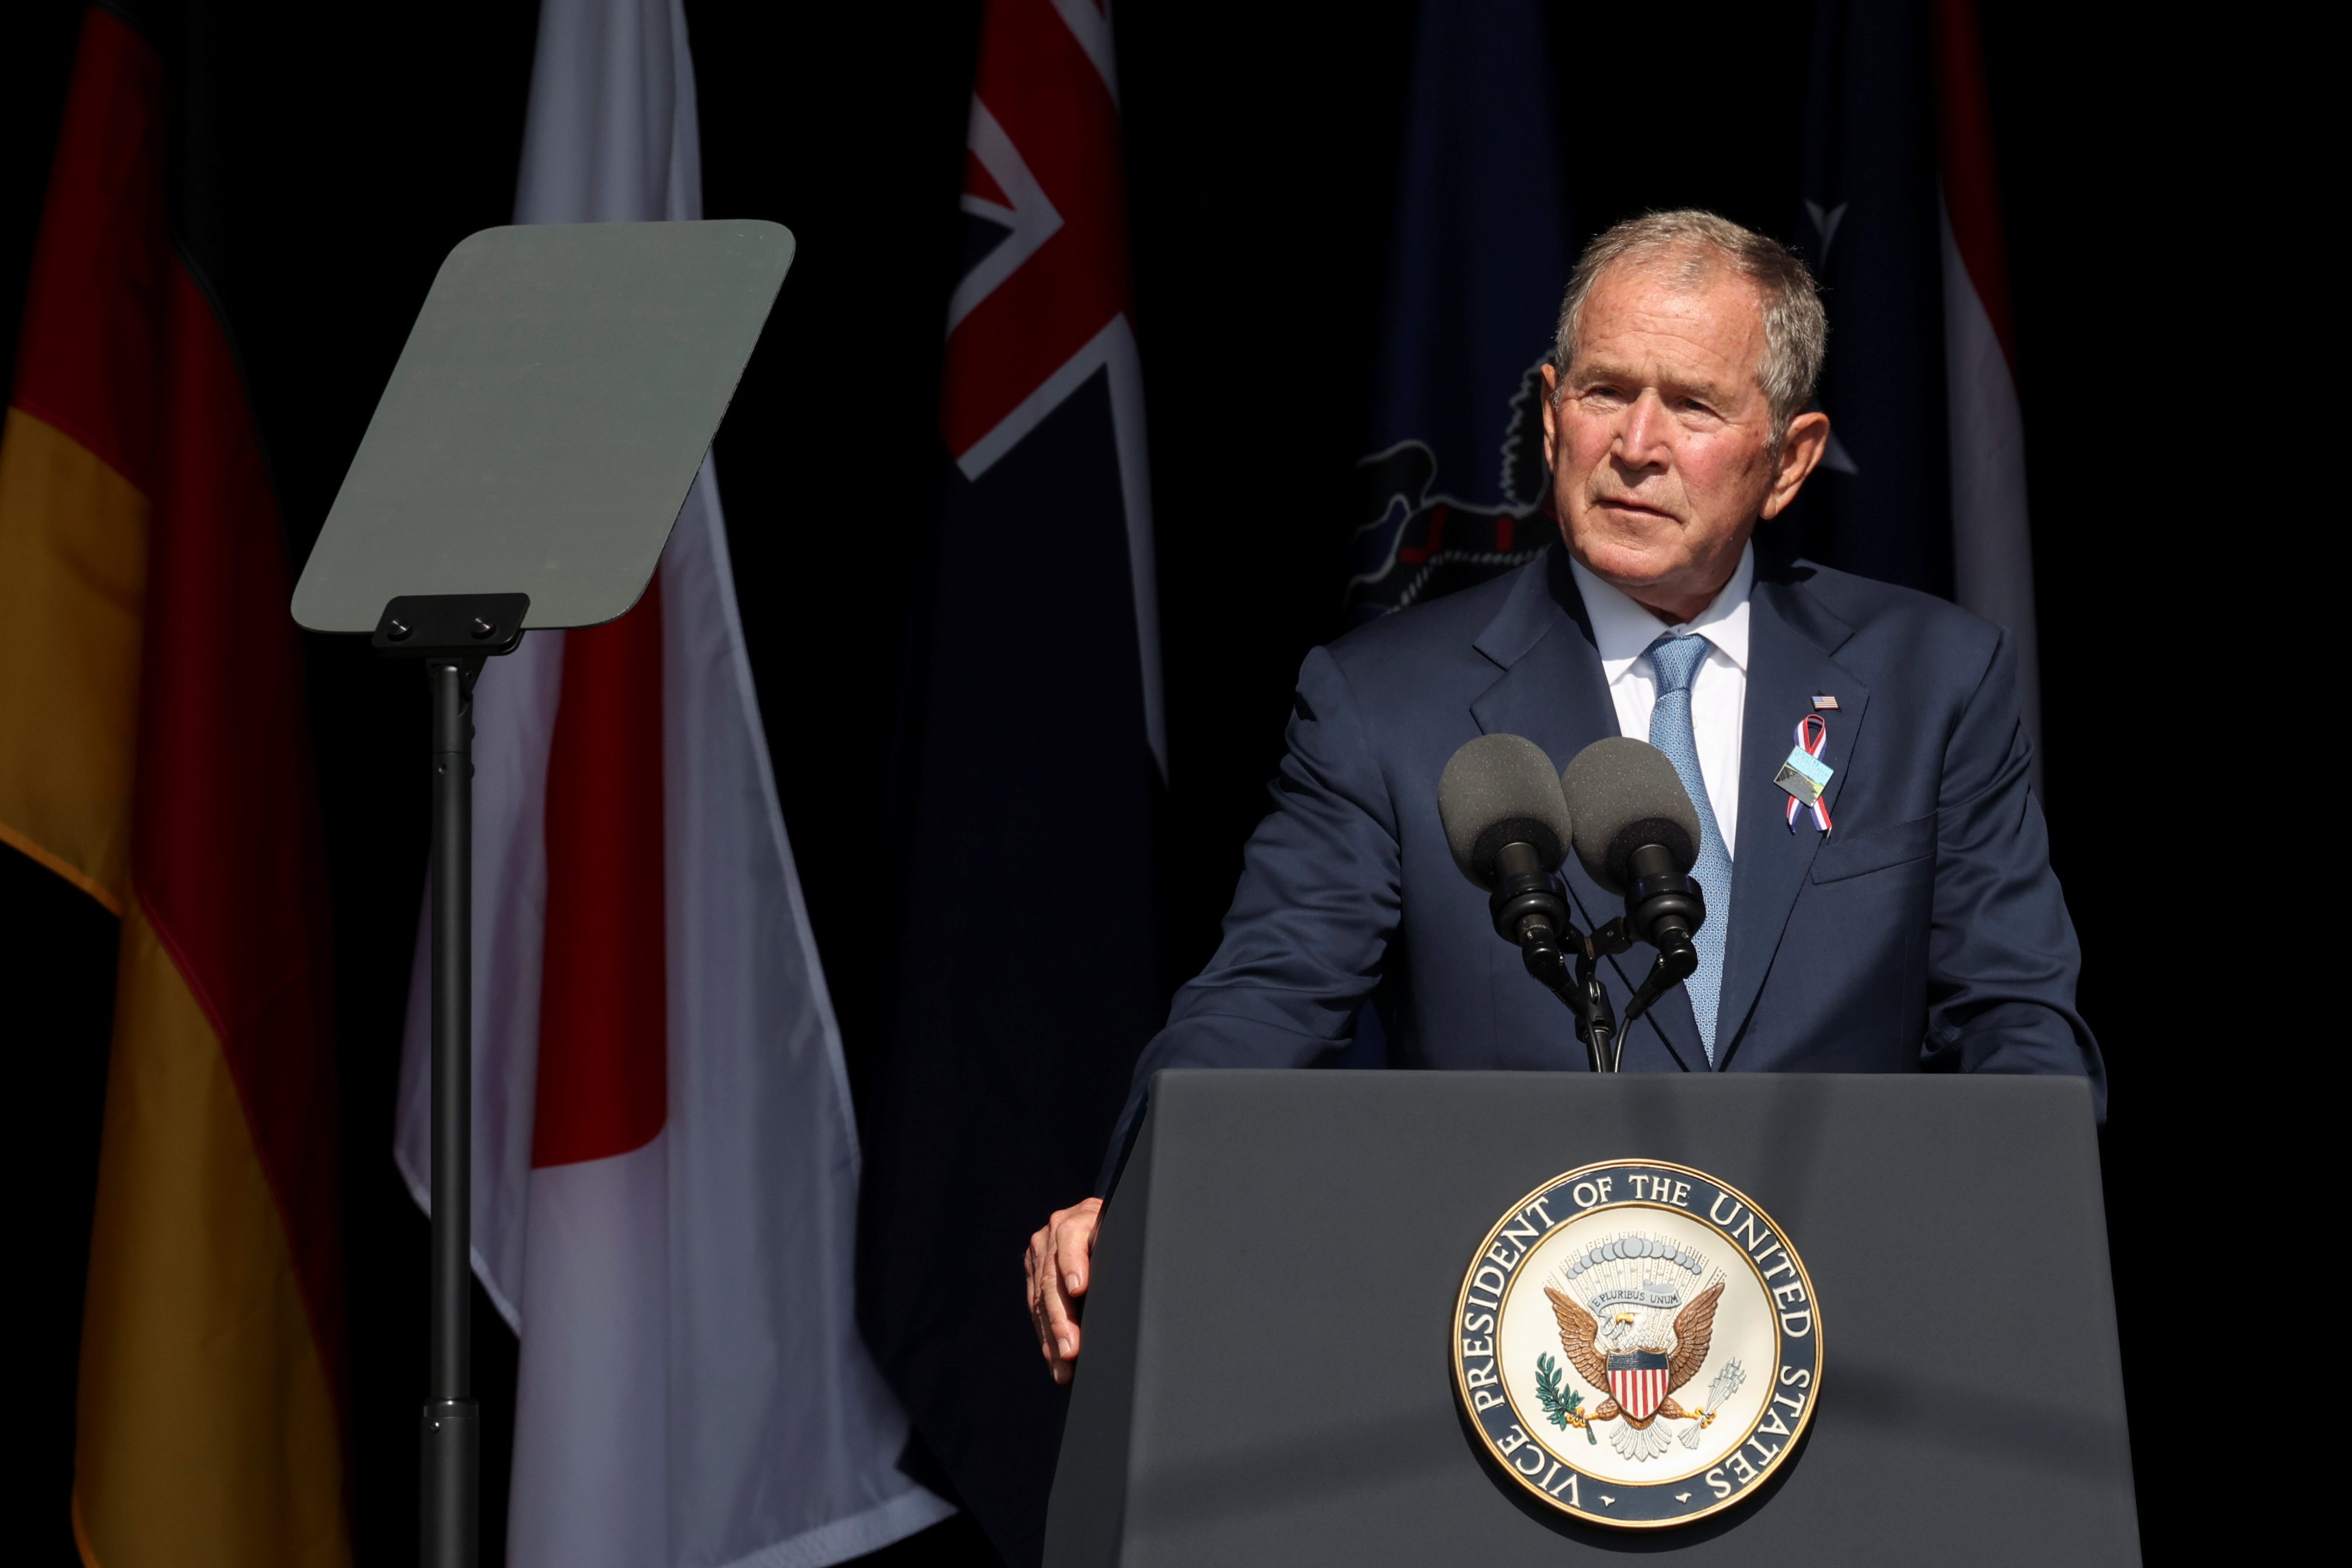 George W. Bush calls out threat of domestic terrorism on 9/11 anniversary